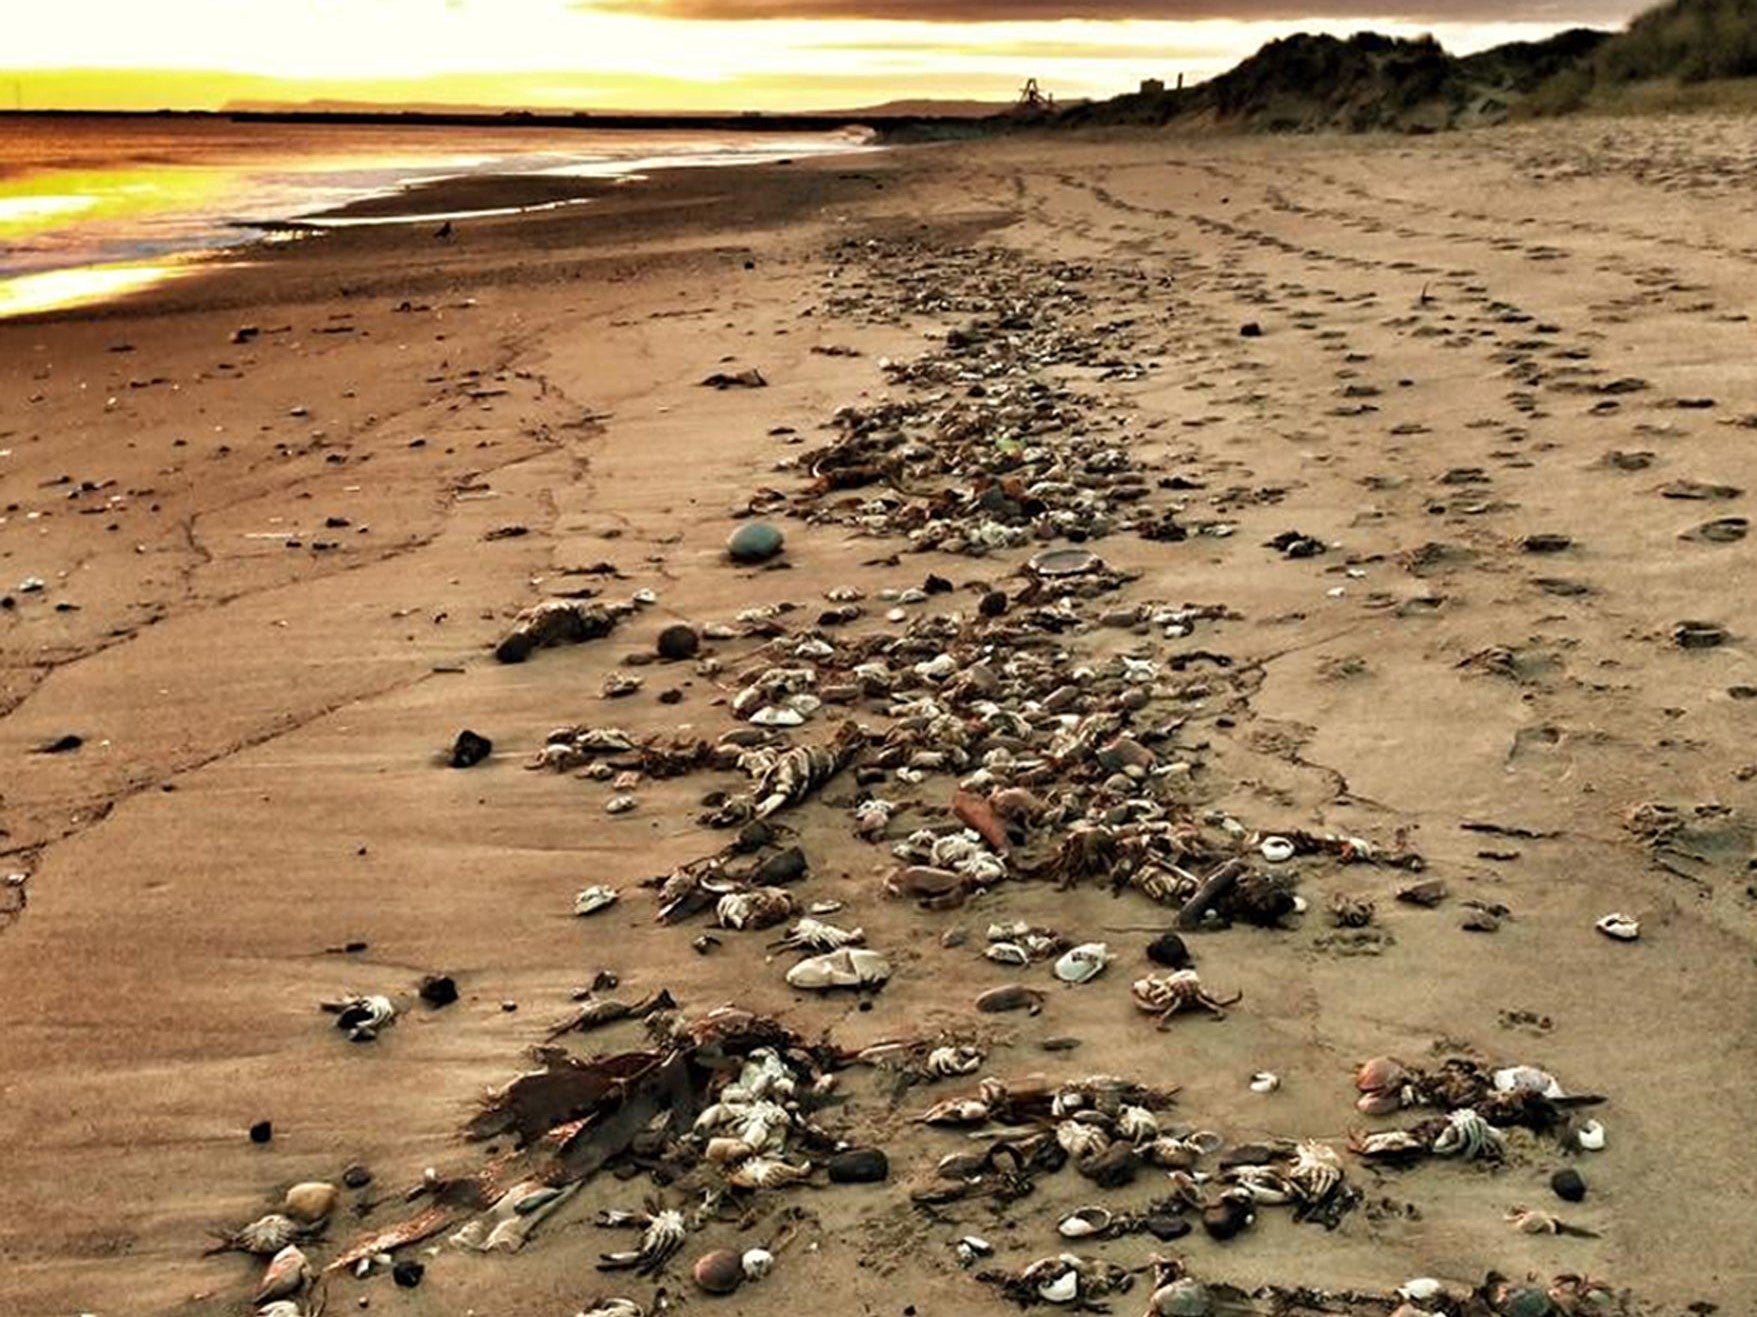 Hundreds of dead crabs on the beach at Seaton Carew, Hartlepoo